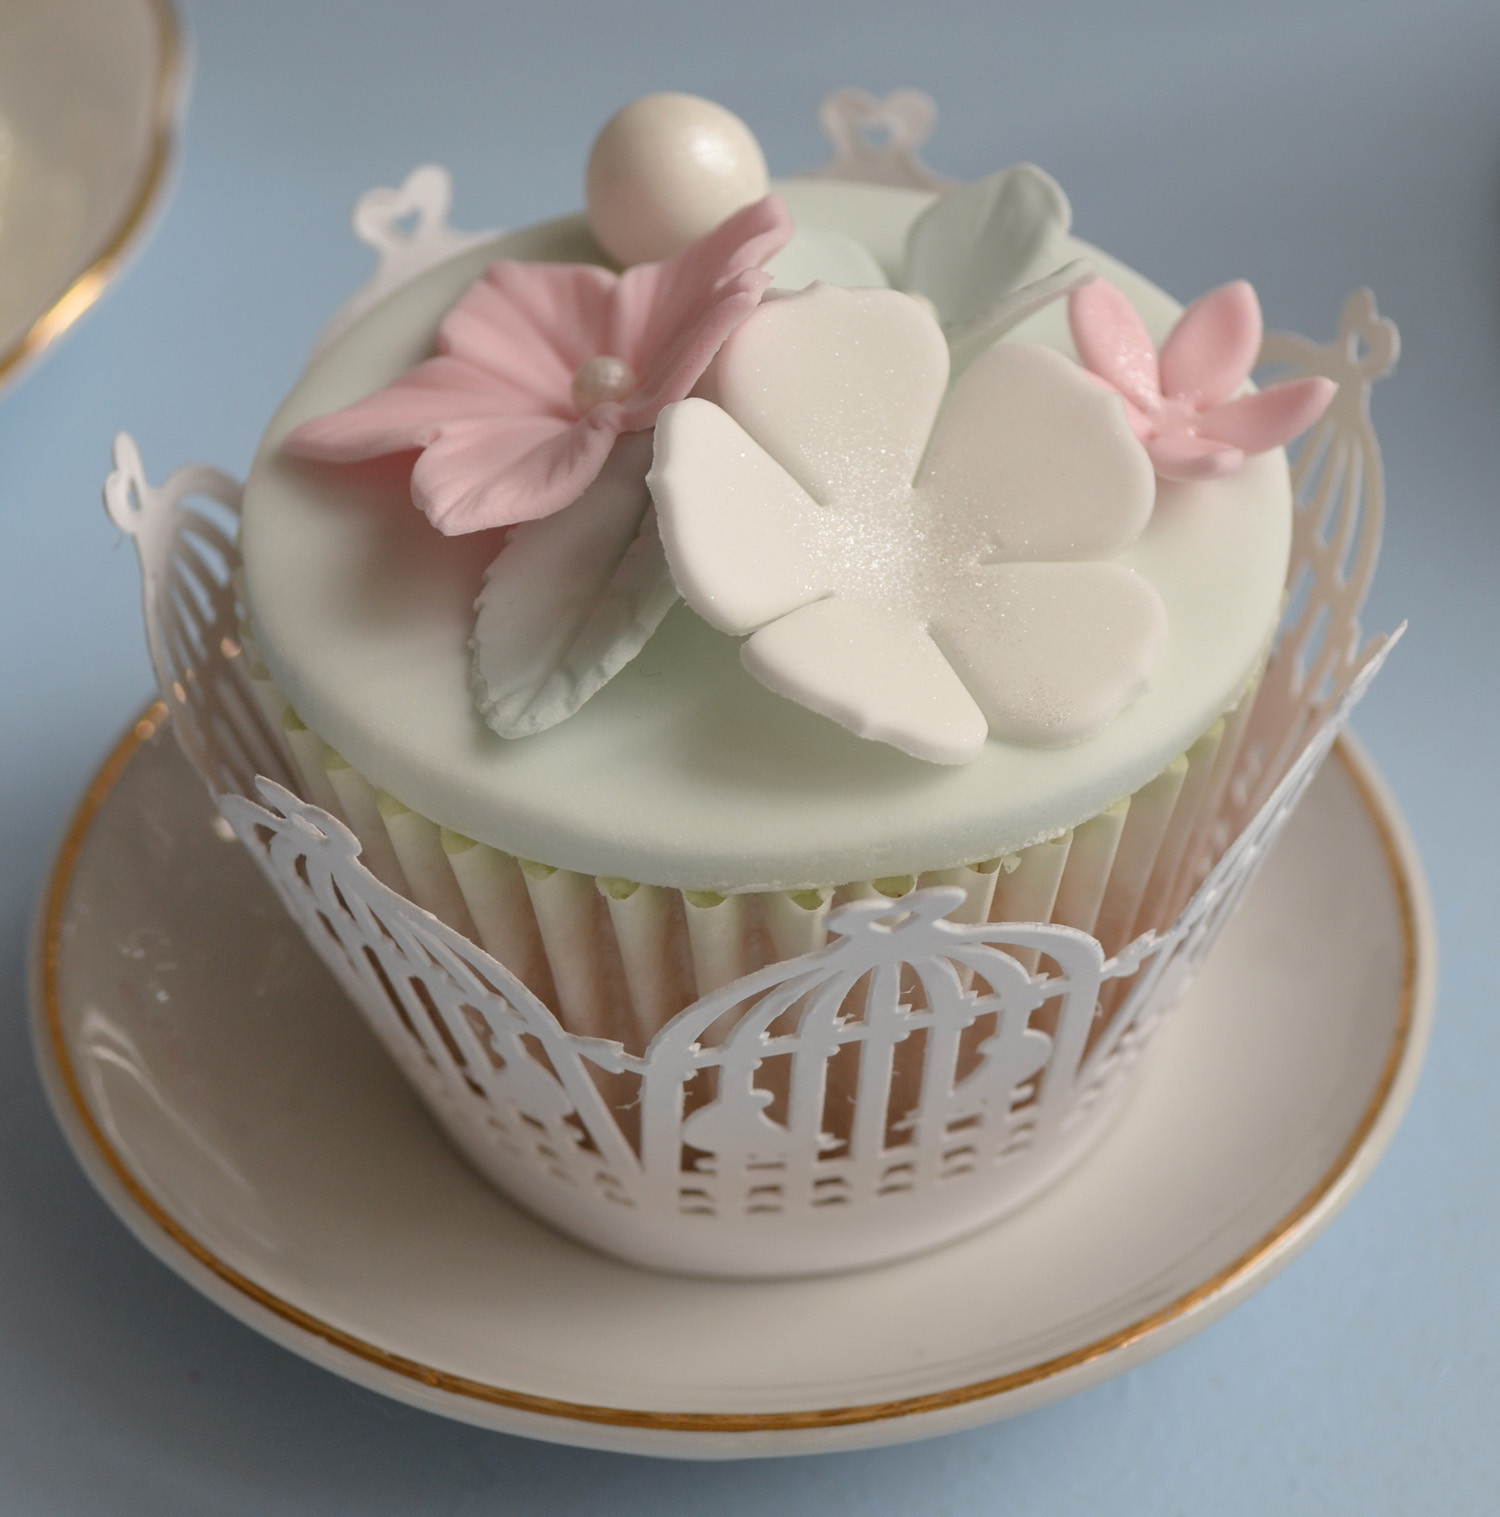 Cup Cake Wedding Cakes
 Little Paper Cakes Vintage Wedding Cupcakes